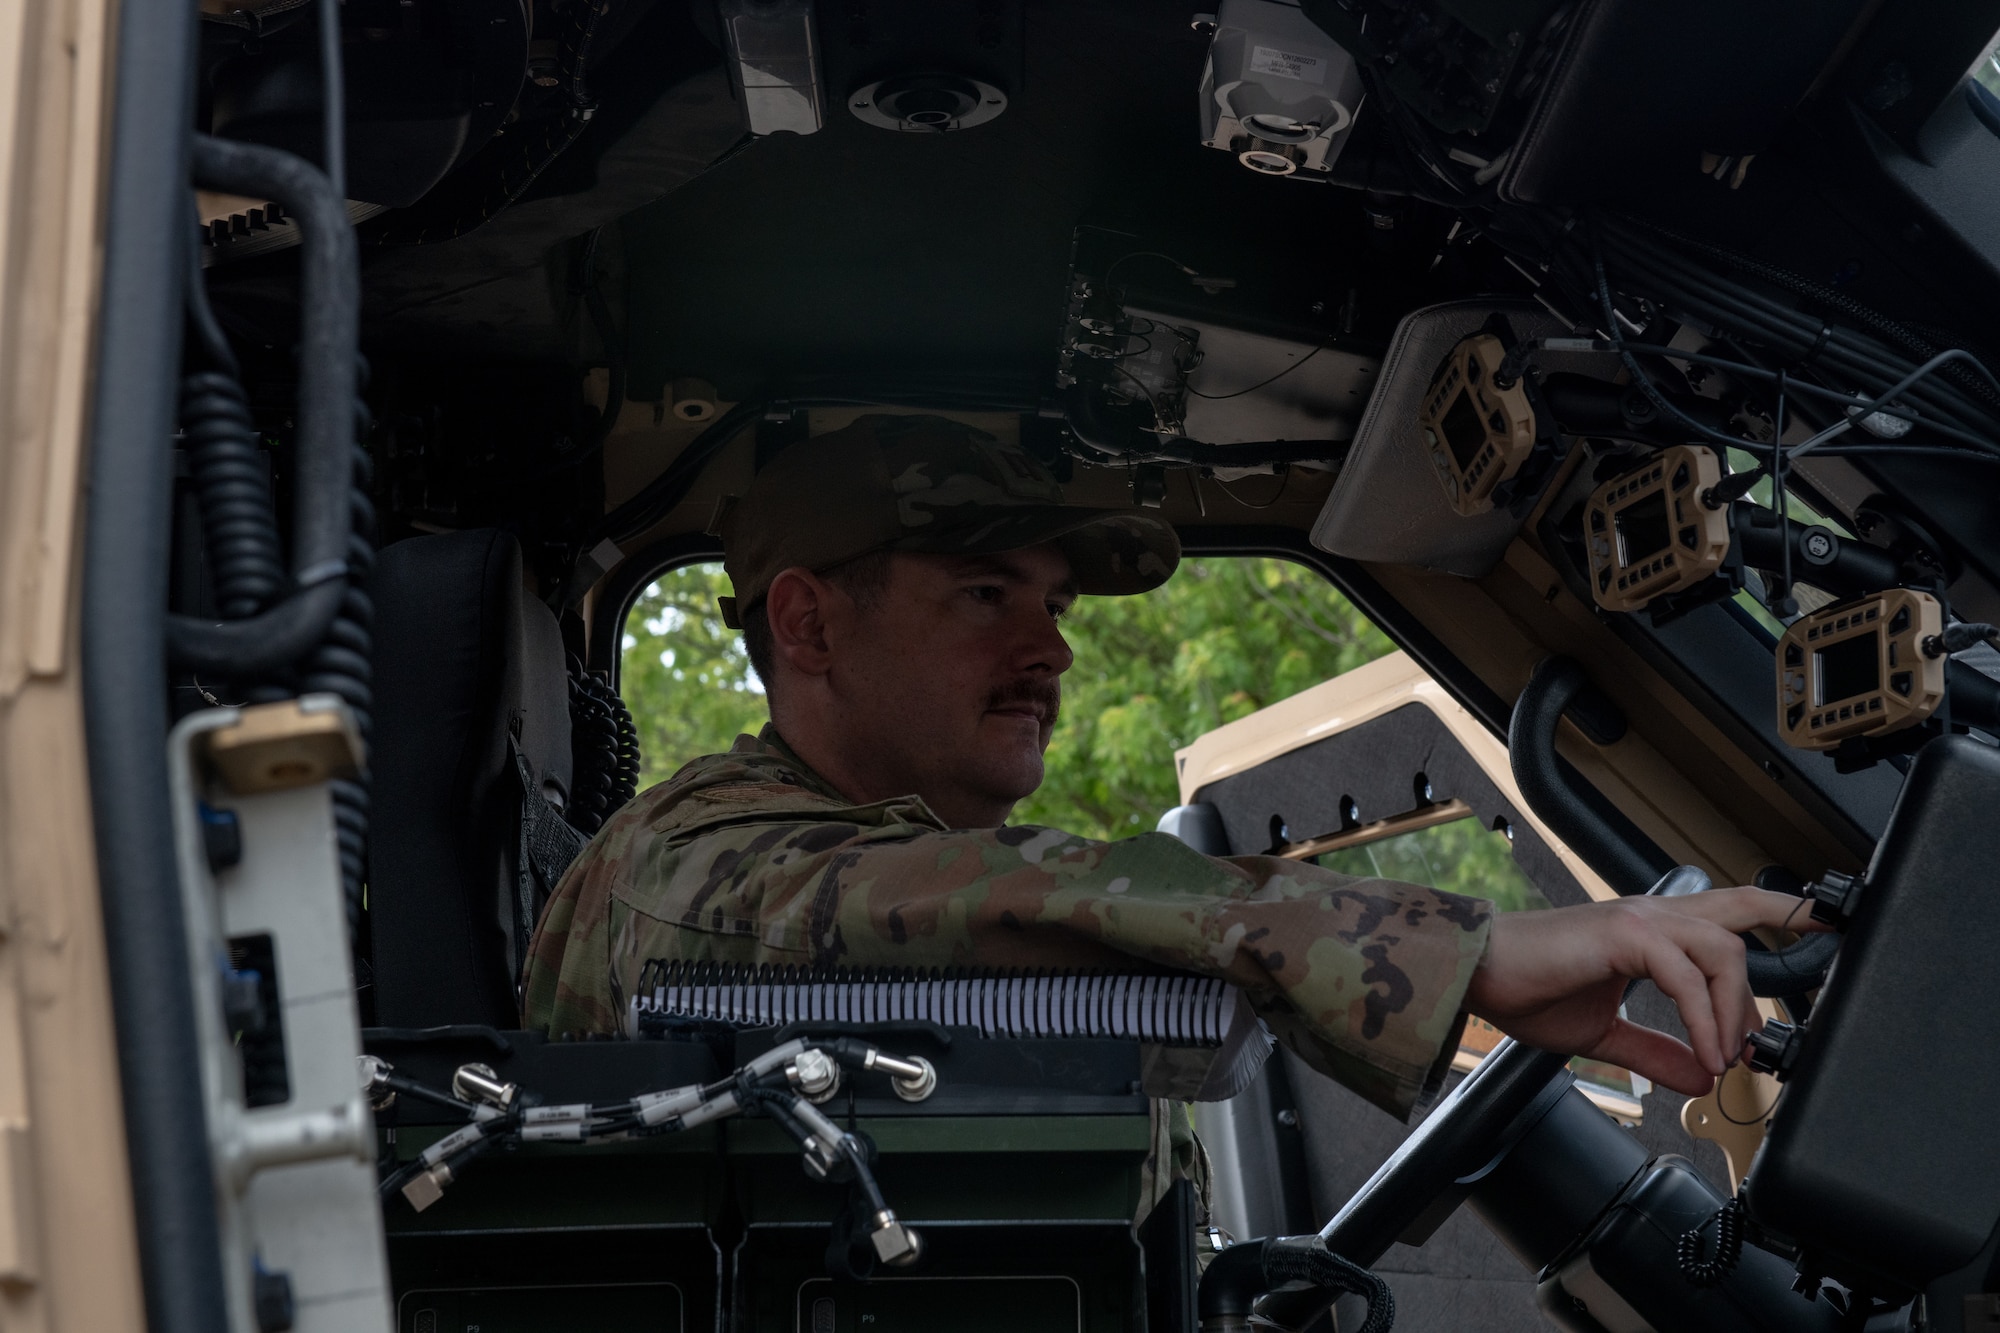 U.S. Air Force Capt. Michael Sanders, 48th Logistics Readiness Squadron vehicle maintenance flight commander, performs electronic checks in Joint Light Tactical Vehicle at RAF Lakenheath, England, June 22, 2023. The JLTVs, which will replace Humvees, will be used for daily operations in the vicinity of the flightline, providing increased operational security for the Liberty Wing. (U.S. Air Force photo by Airman Delanie Brown)